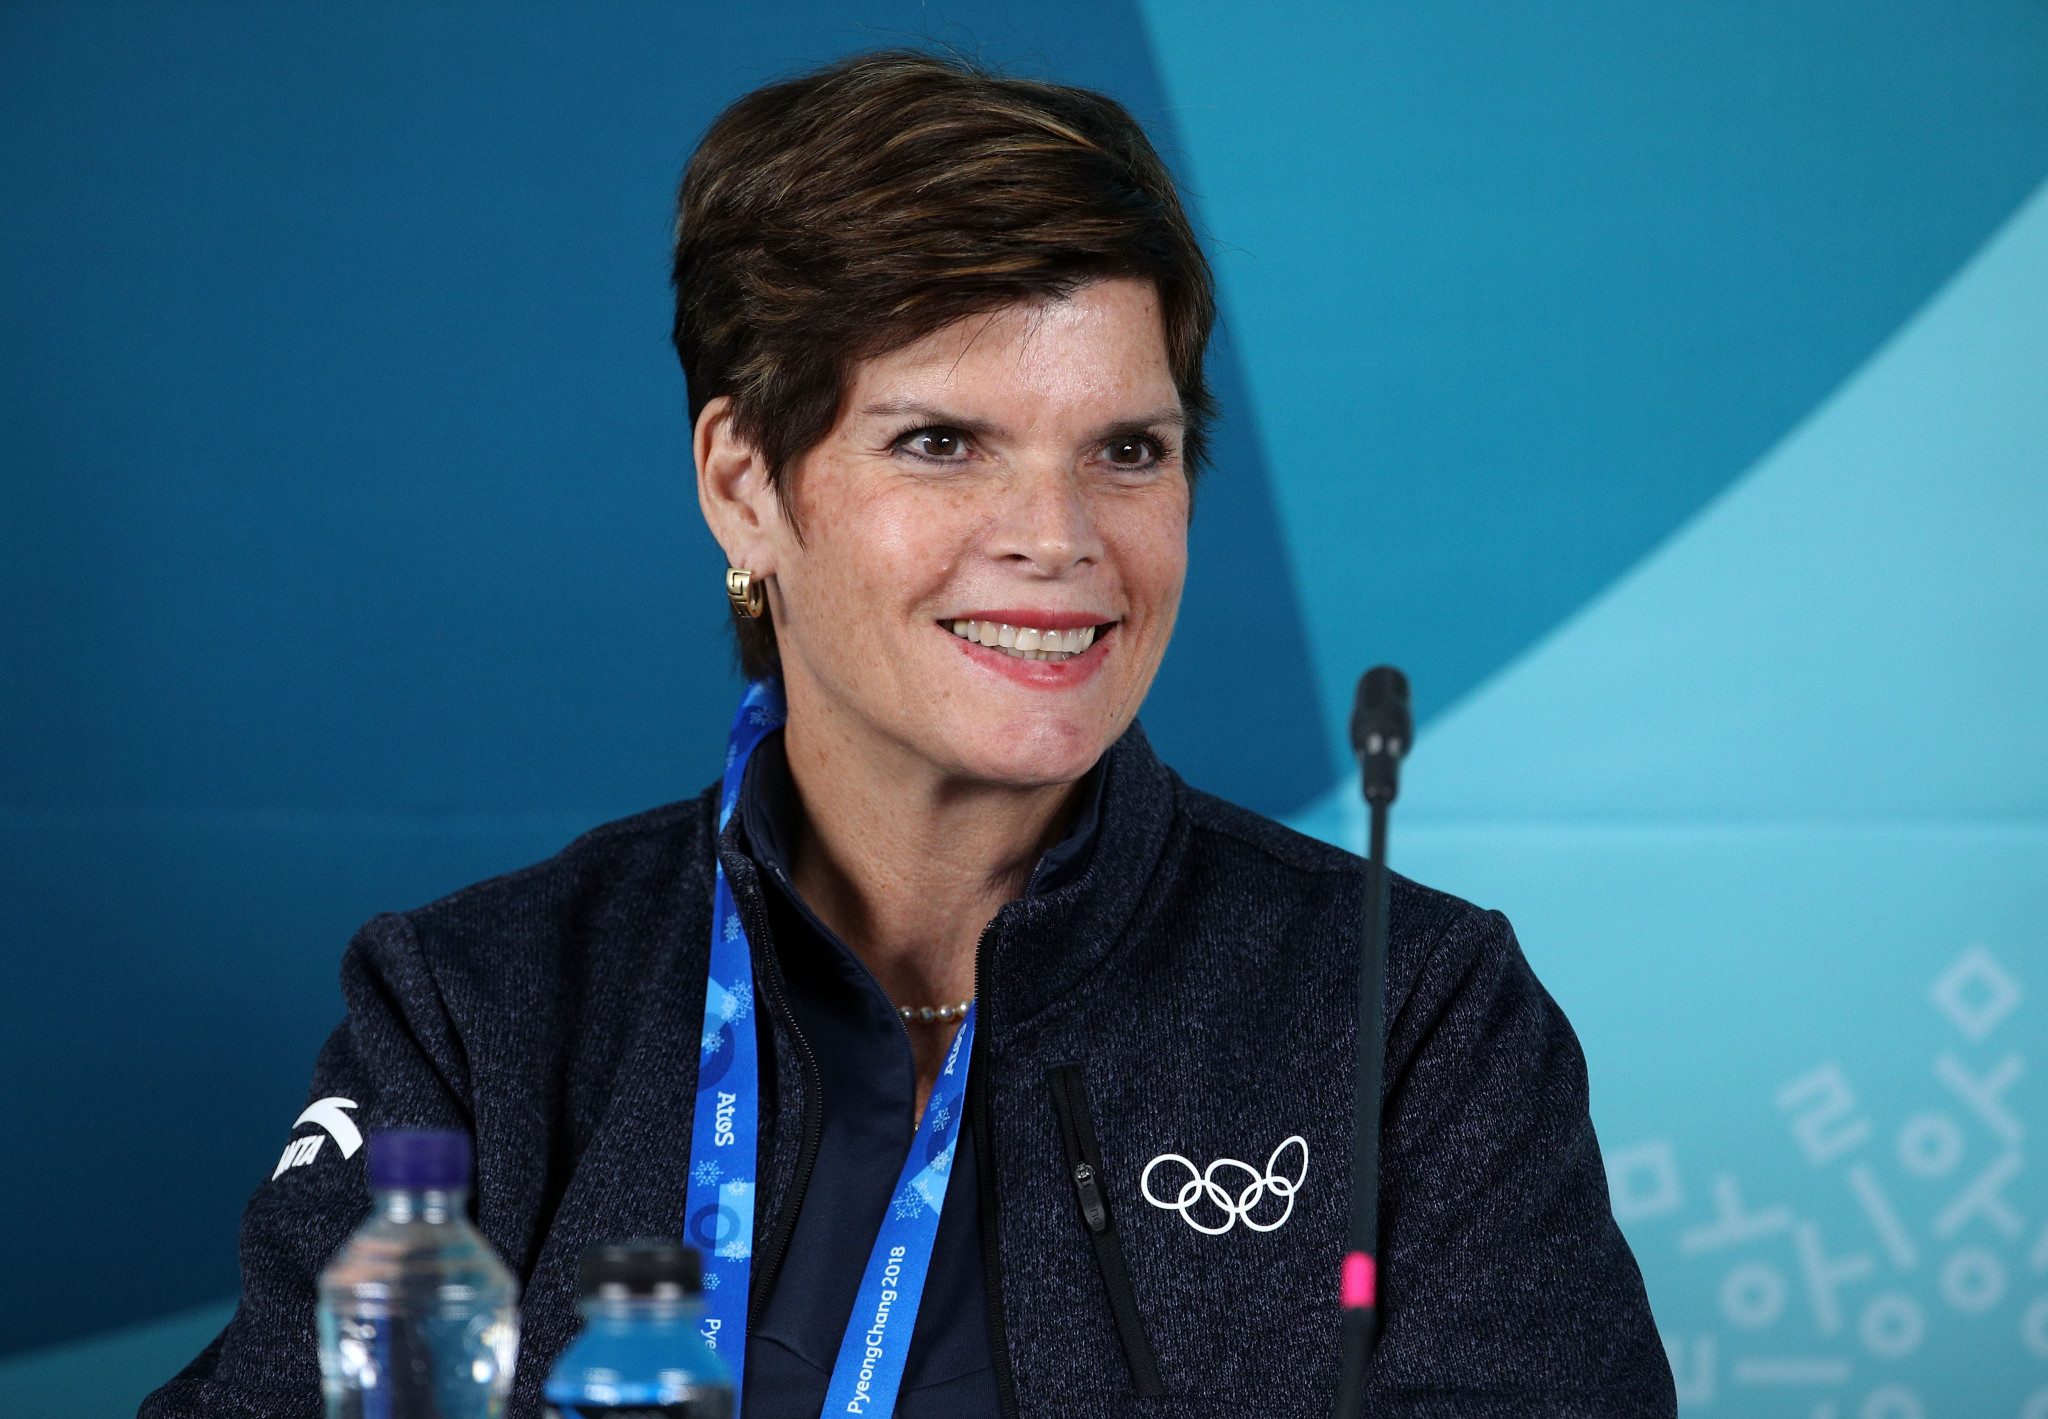 Nicole Hoevertsz of Aruba chairs the IOC Coordination Commission, and said Los Angeles 2028 had achieved "astute commercial success" ©Getty Images